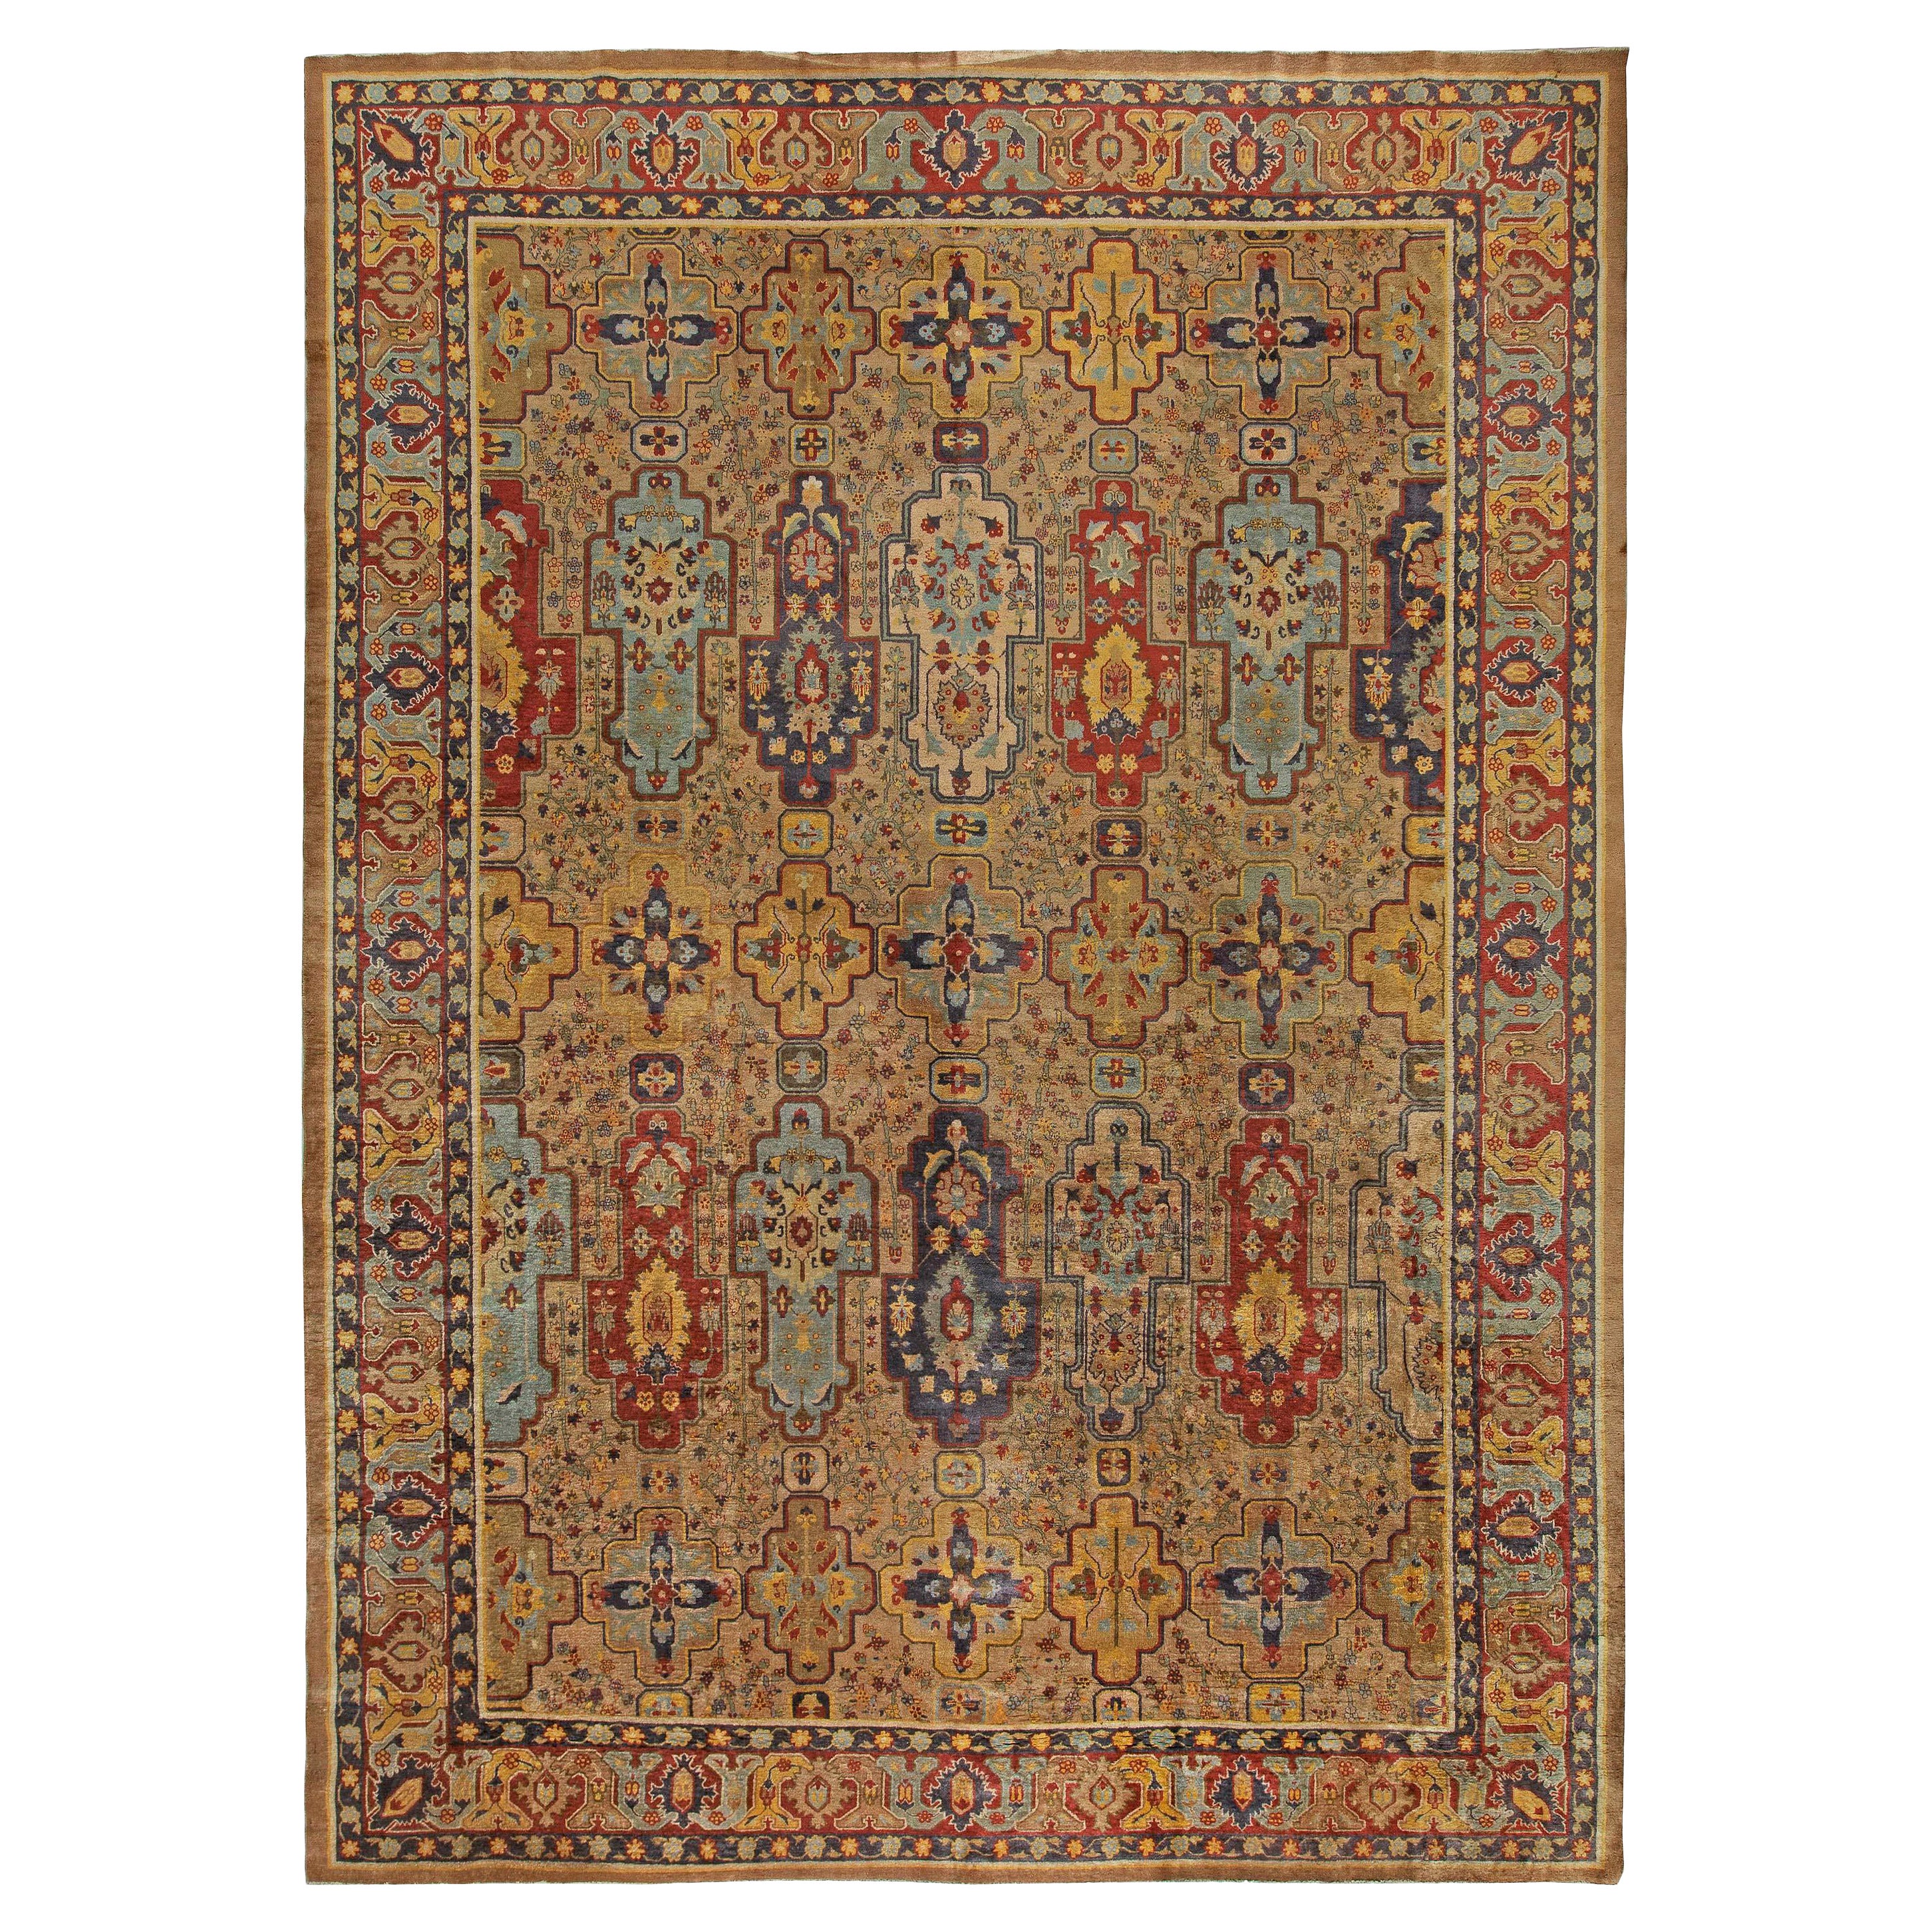 Early 20th Century Indian Handmade Wool Carpet For Sale